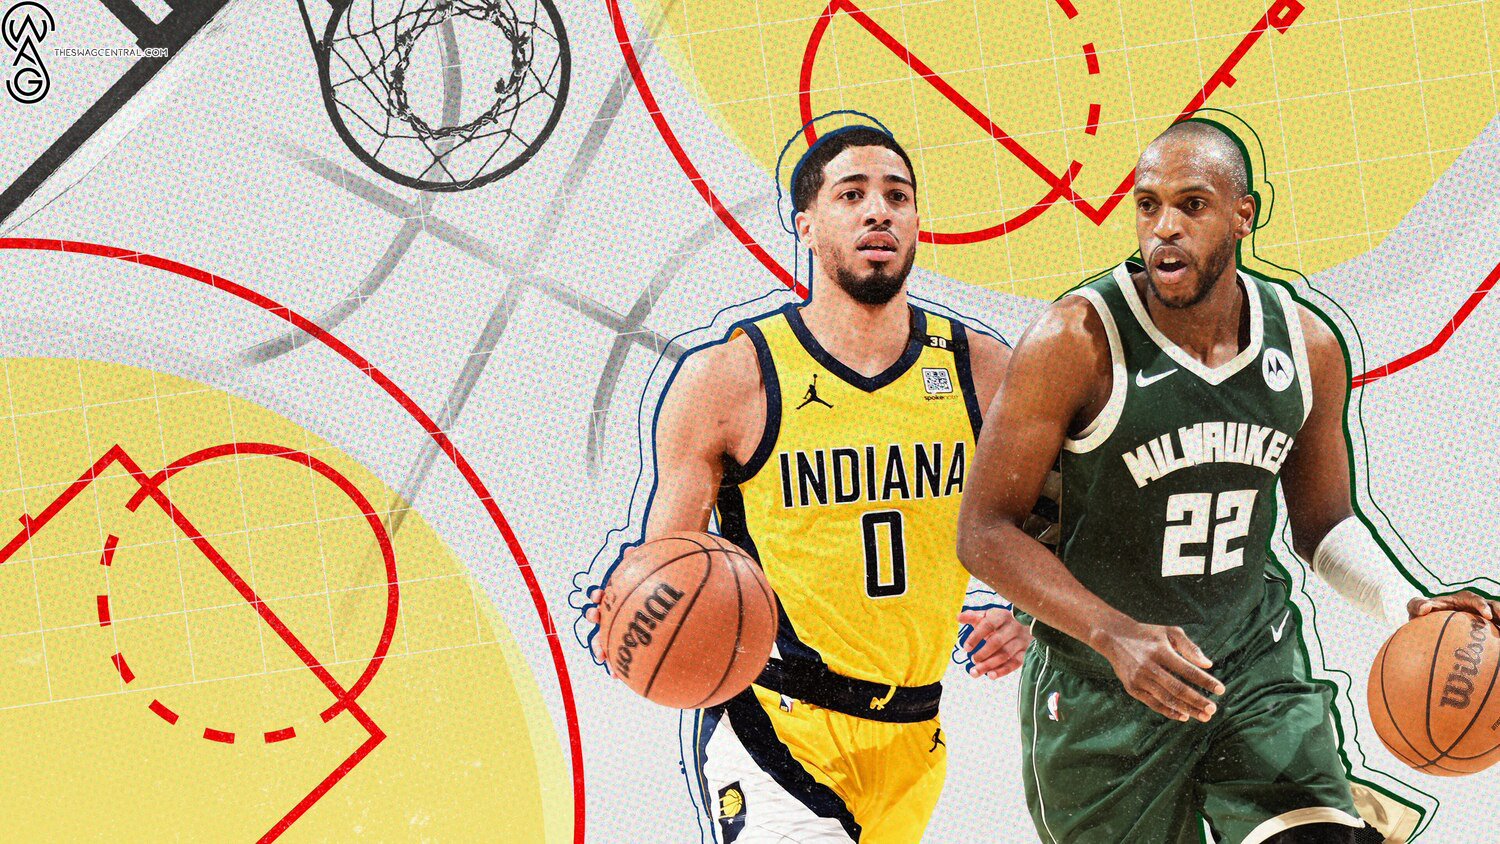 Bucks Crash Out in First Round Again, Pacers Seal Series Win